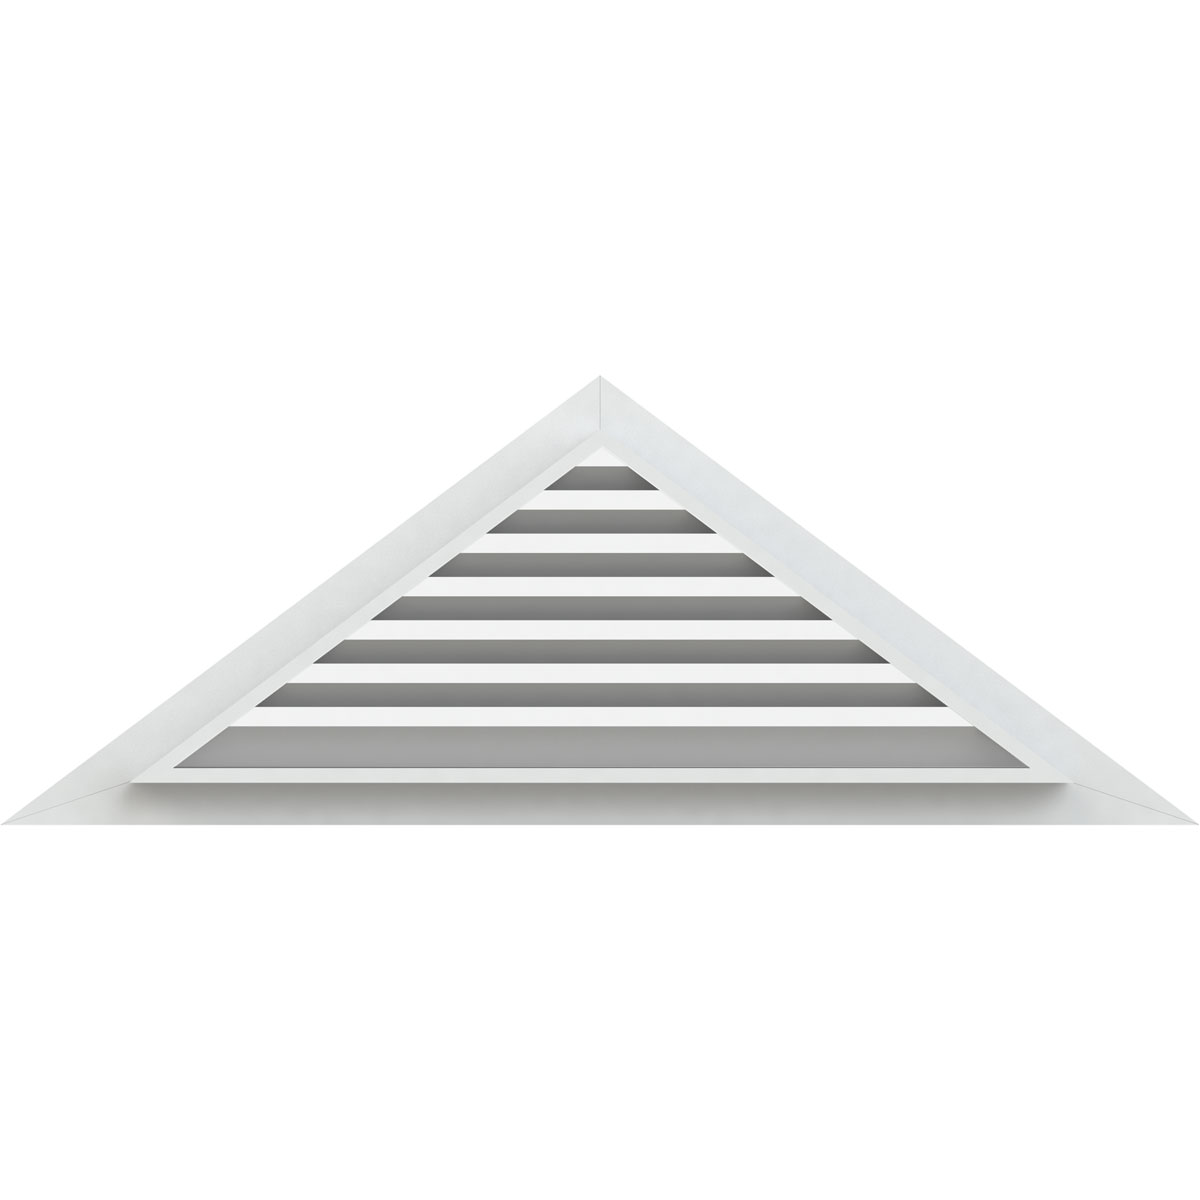 Ekena Millwork 44"W x 14 5/8"H Triangle Gable Vent (60 1/2"W x 20 1/8"H Frame Size) 8/12 Pitch Functional, PVC Gable Vent with 1" x 4" Flat Trim Frame - image 4 of 14